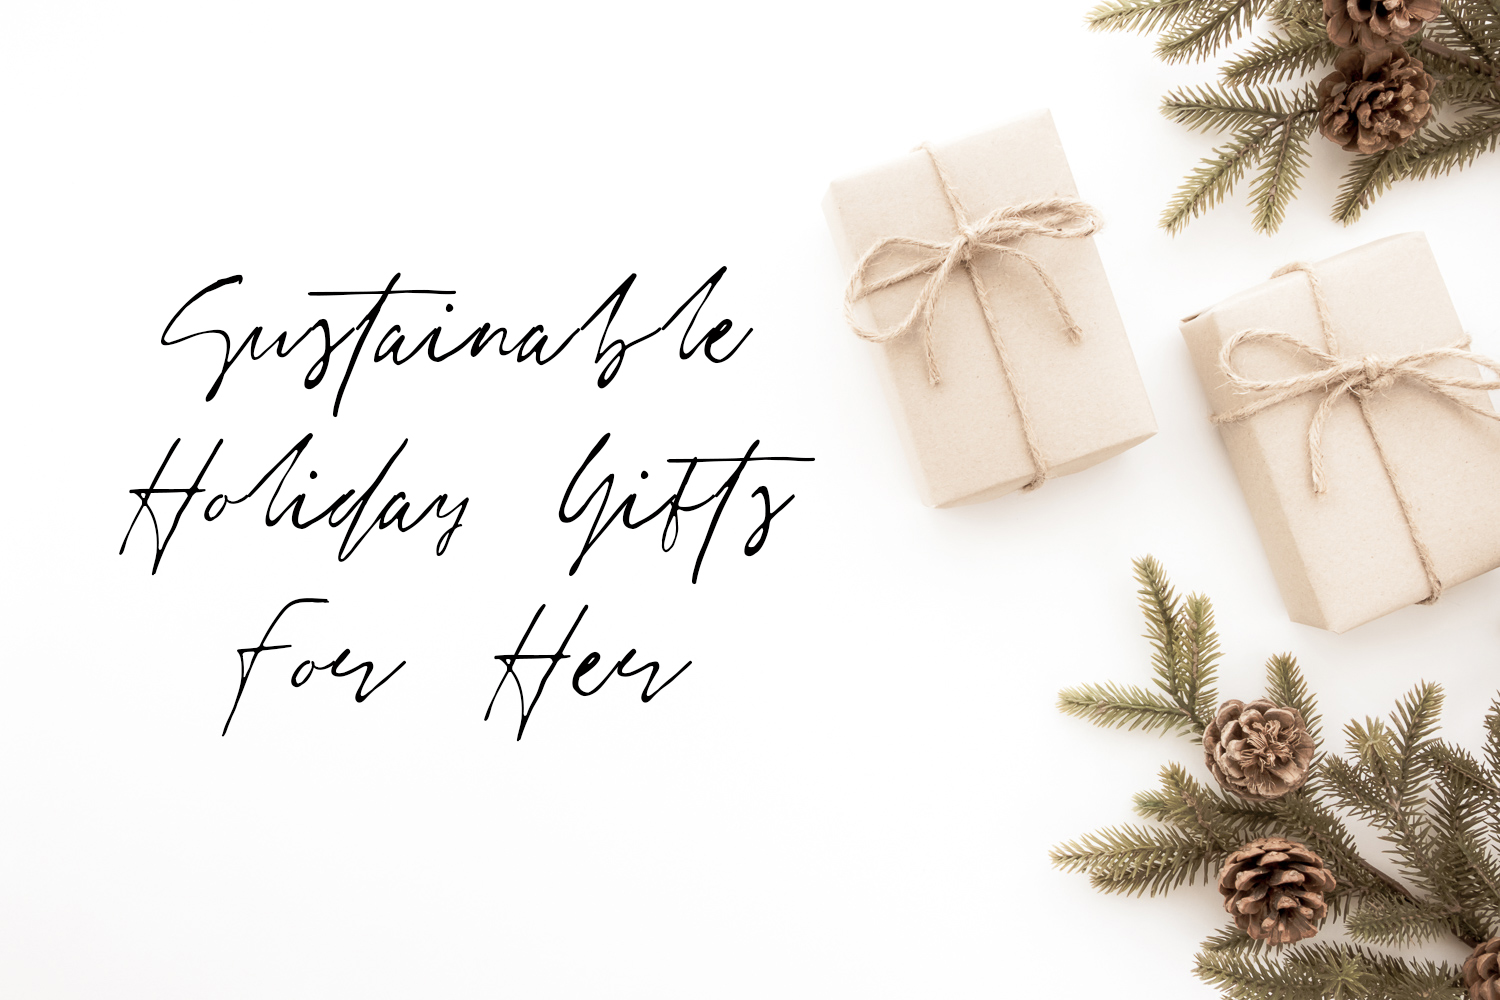 The Sustainable Holiday Gift Guides: Gifts for Her